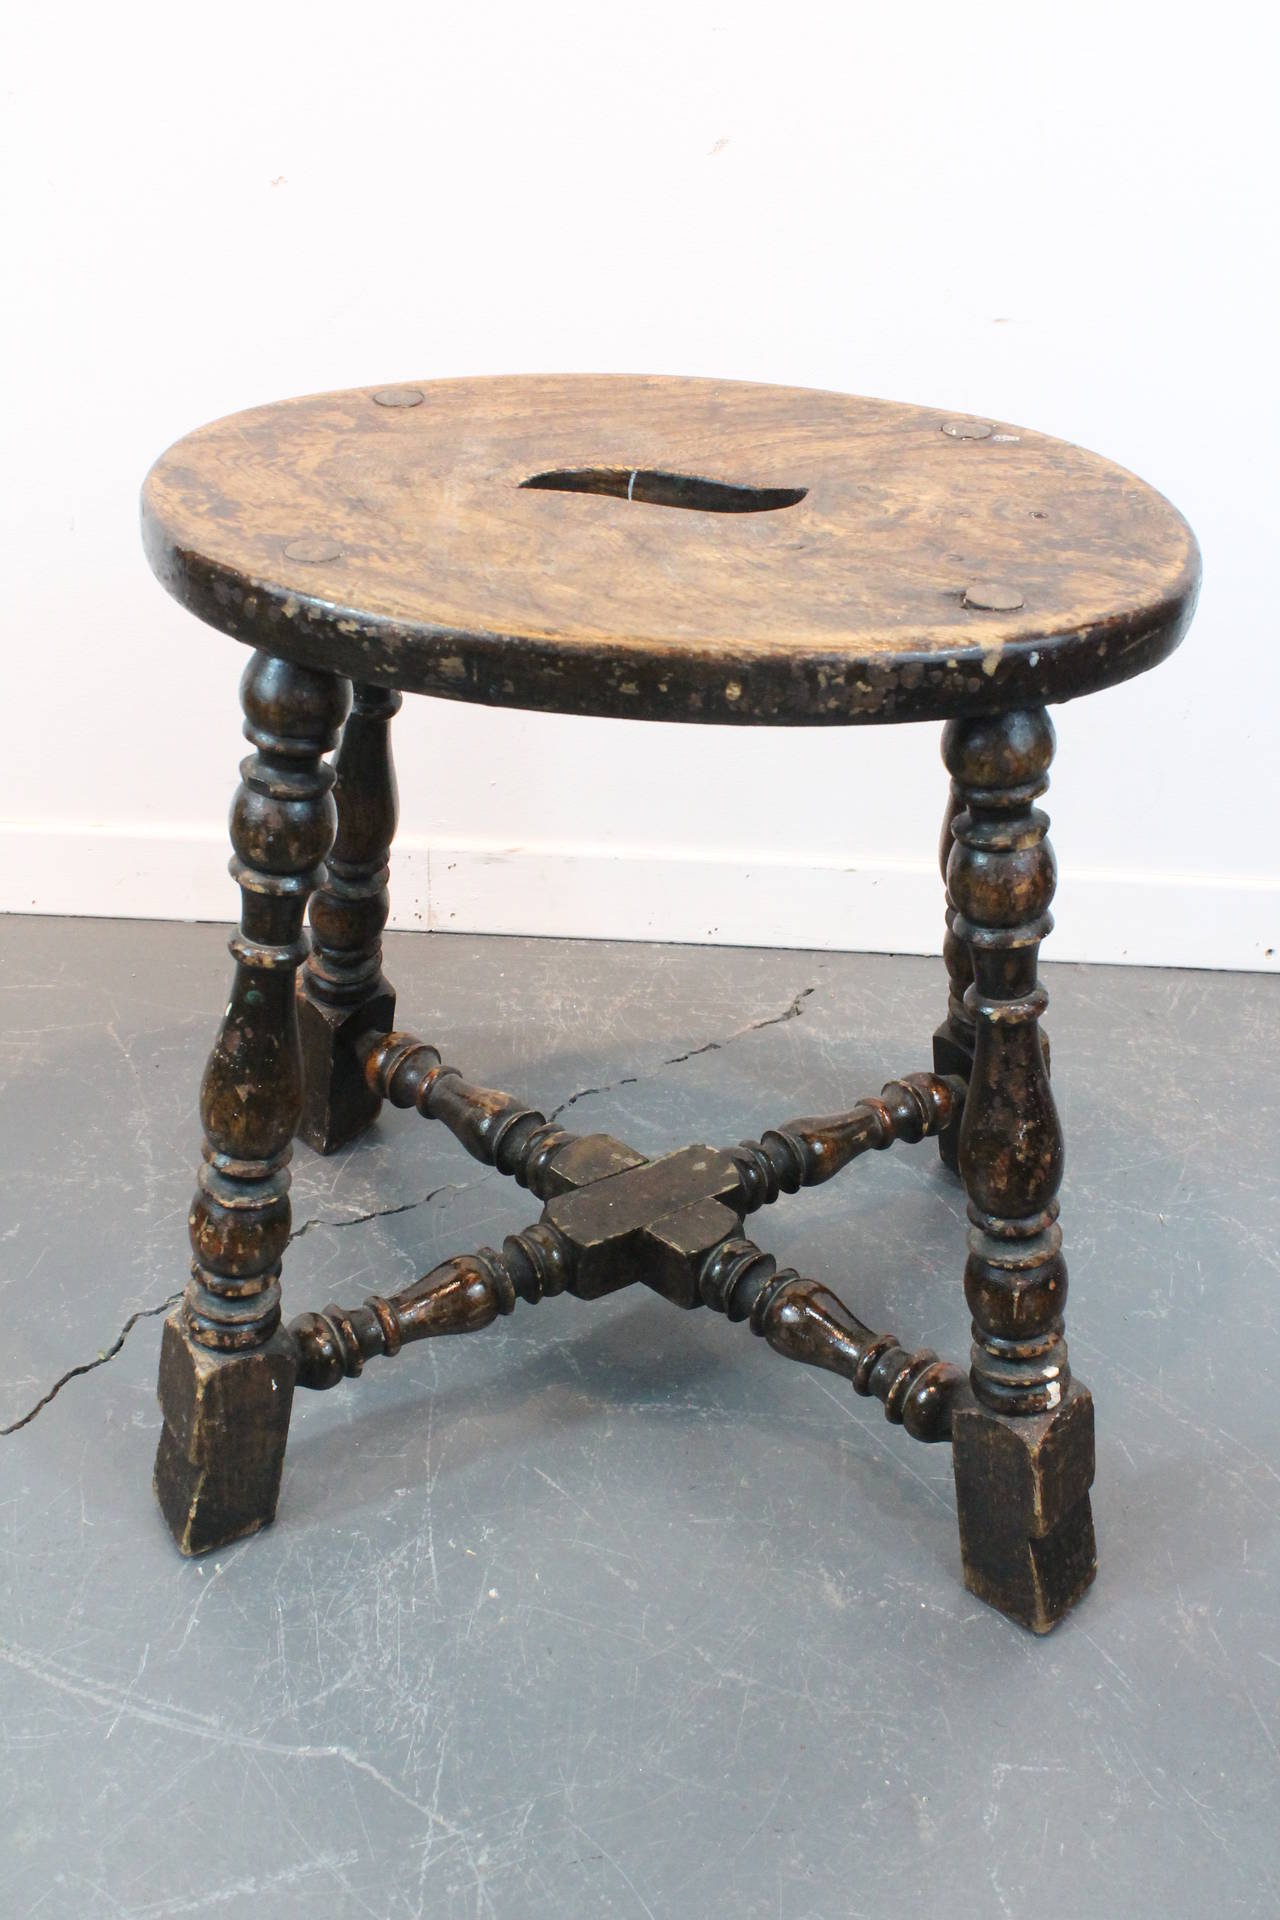 Great design and turnings on this William and Mary stool.
Wonderful stylized cutout in seating surface for carrying.